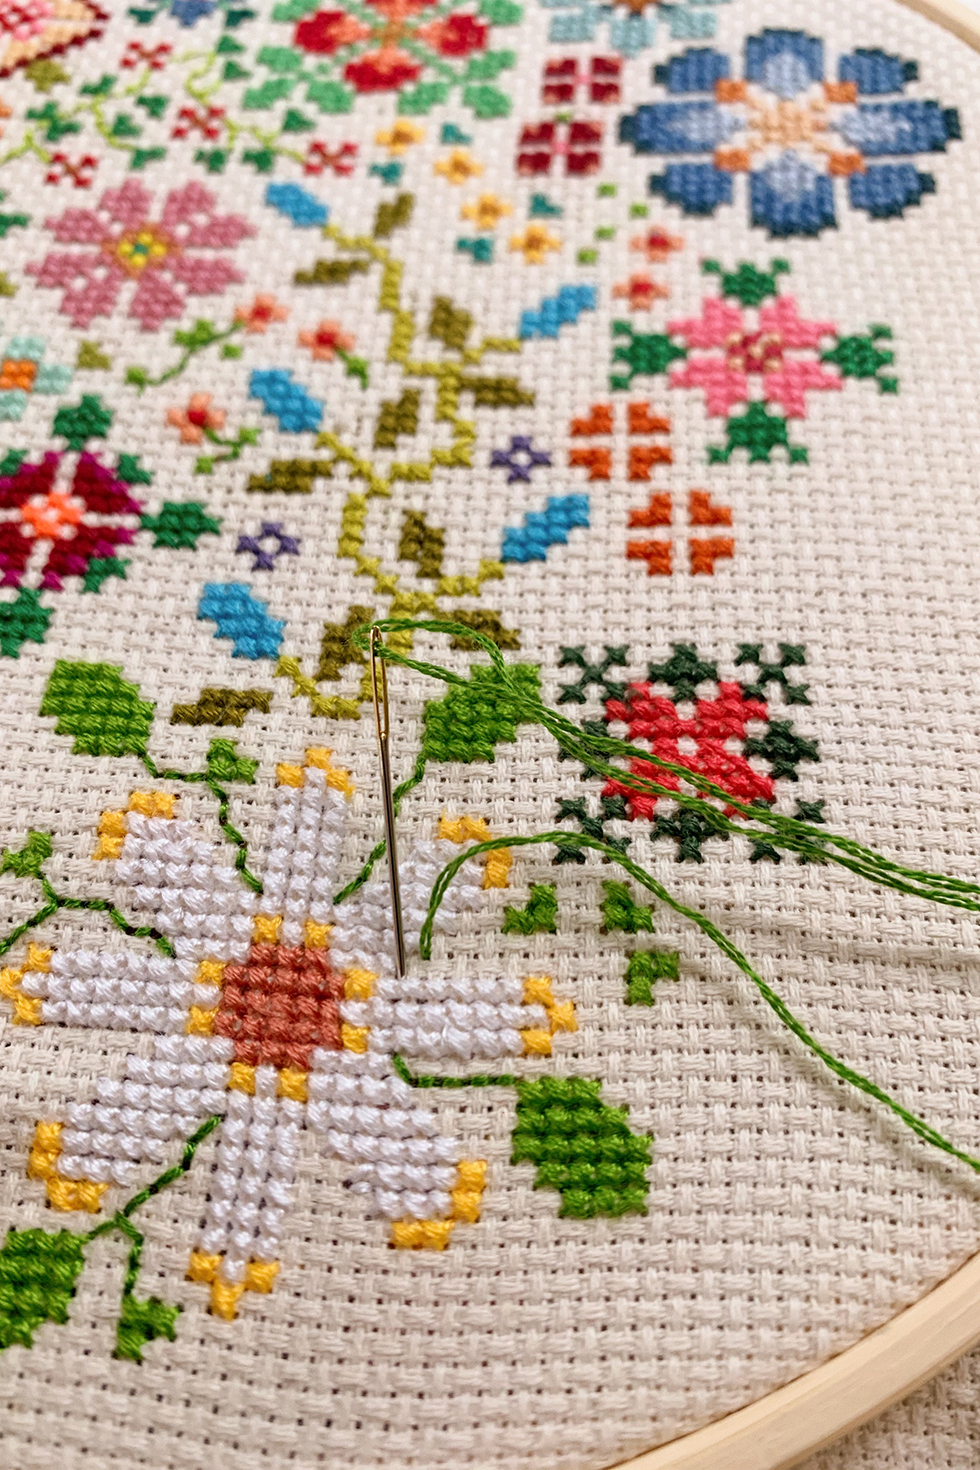 flowers floral tropical cross stitch sampler Mothers Day cross stitch gift for mom DIY Cross stitch patterns pdf modern counted easy cross stitch chart 